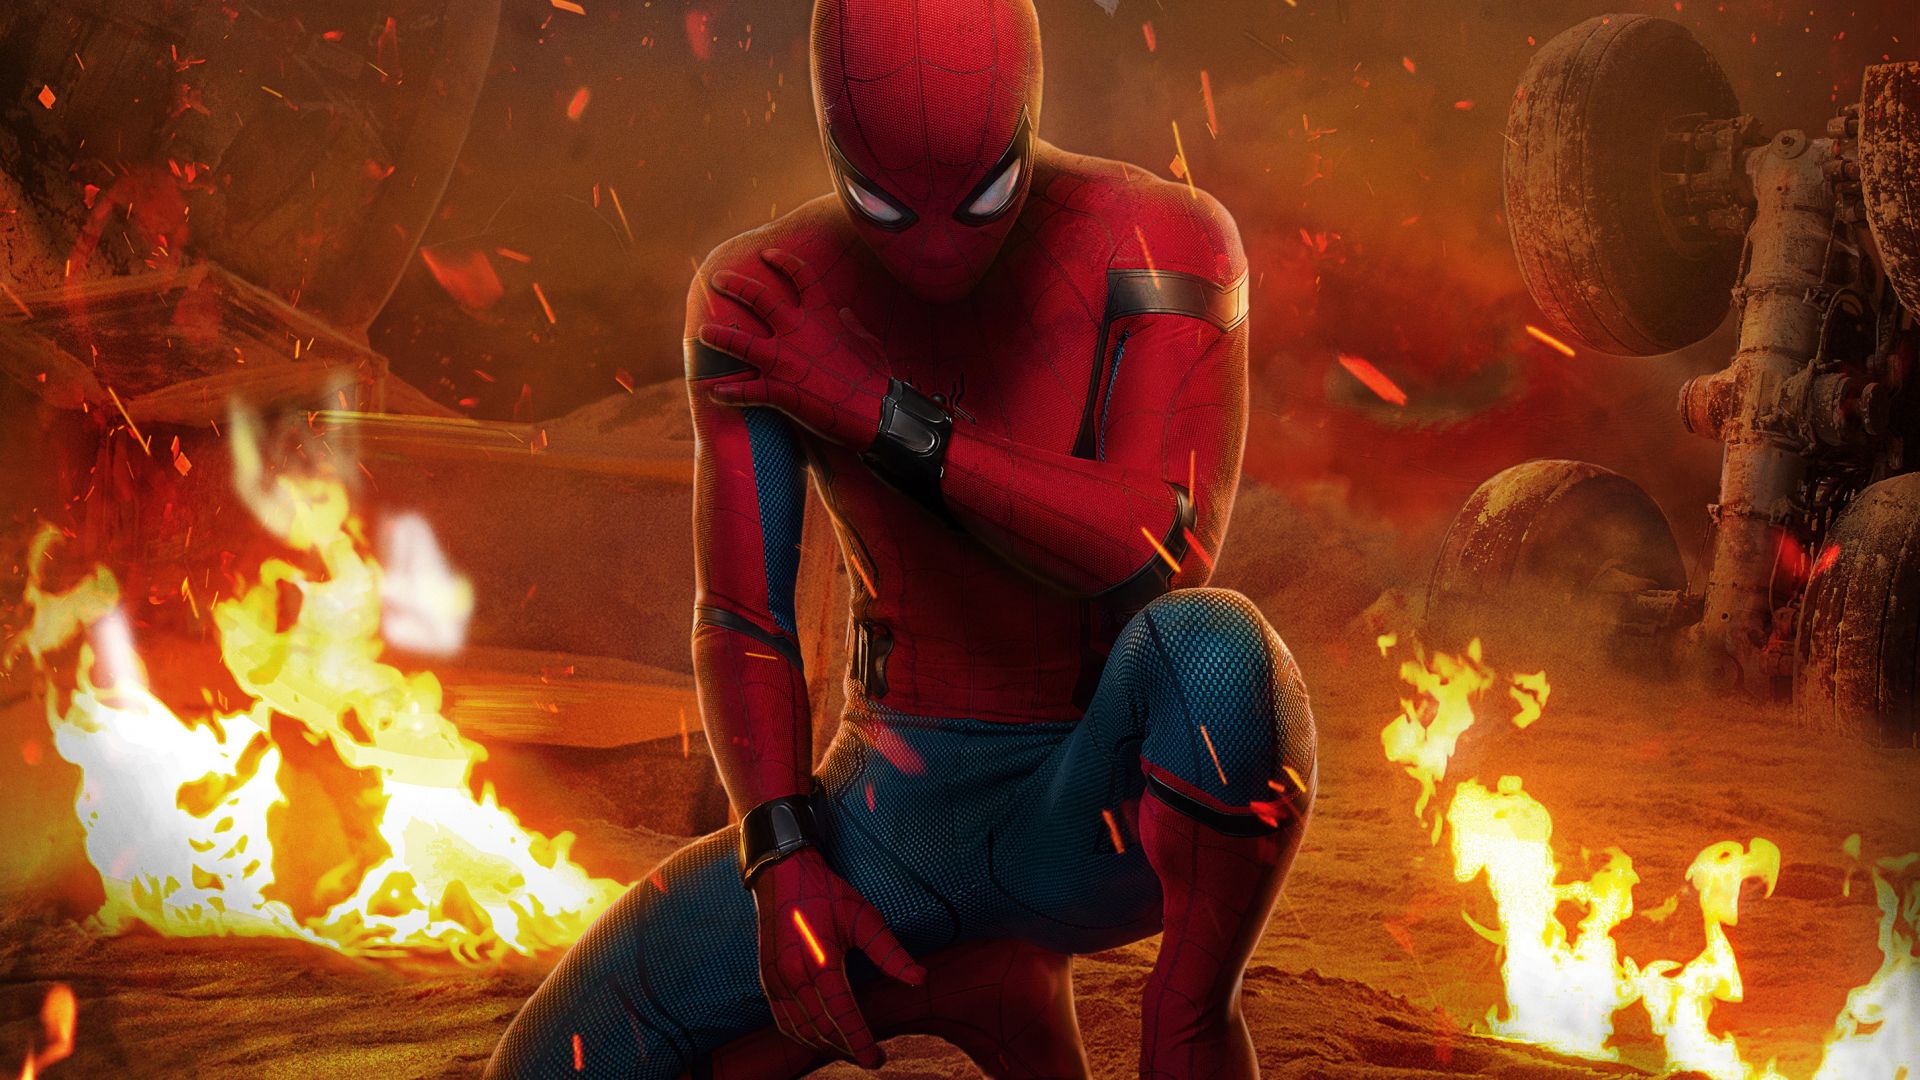 Wallpaper Spider Man: Homecoming, movie, poster